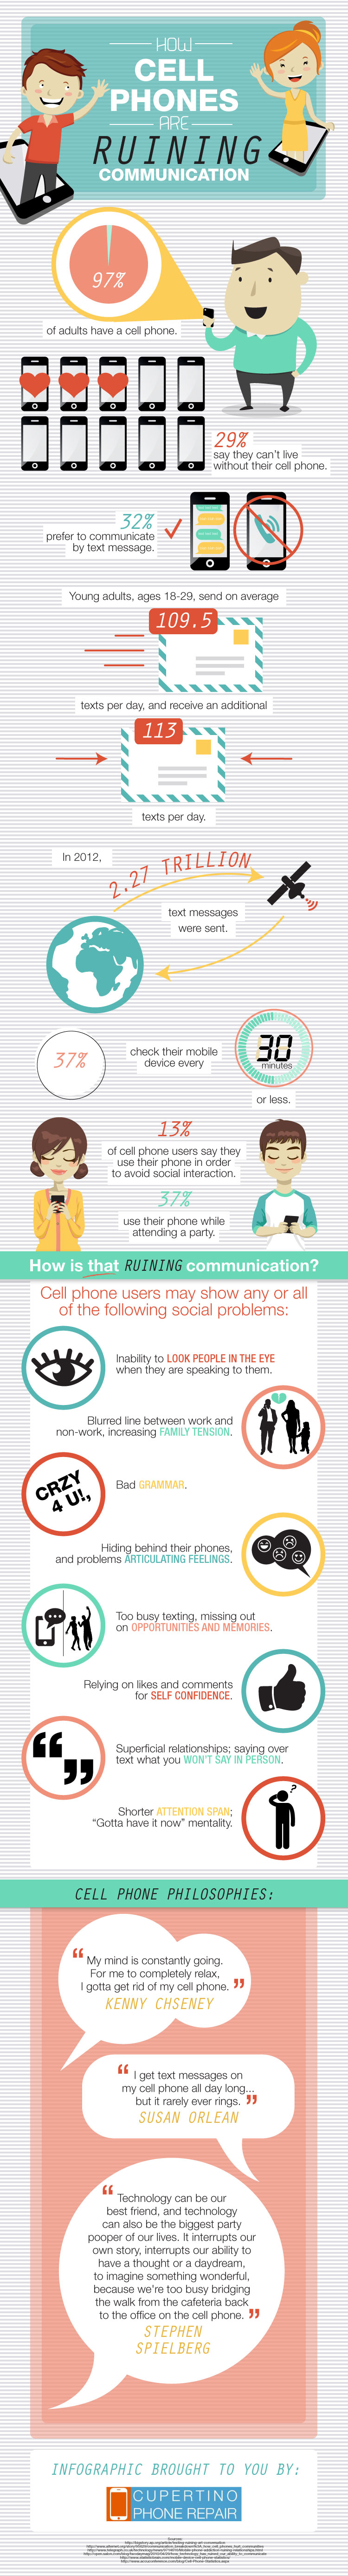 How Cell Phones are Ruining Communication